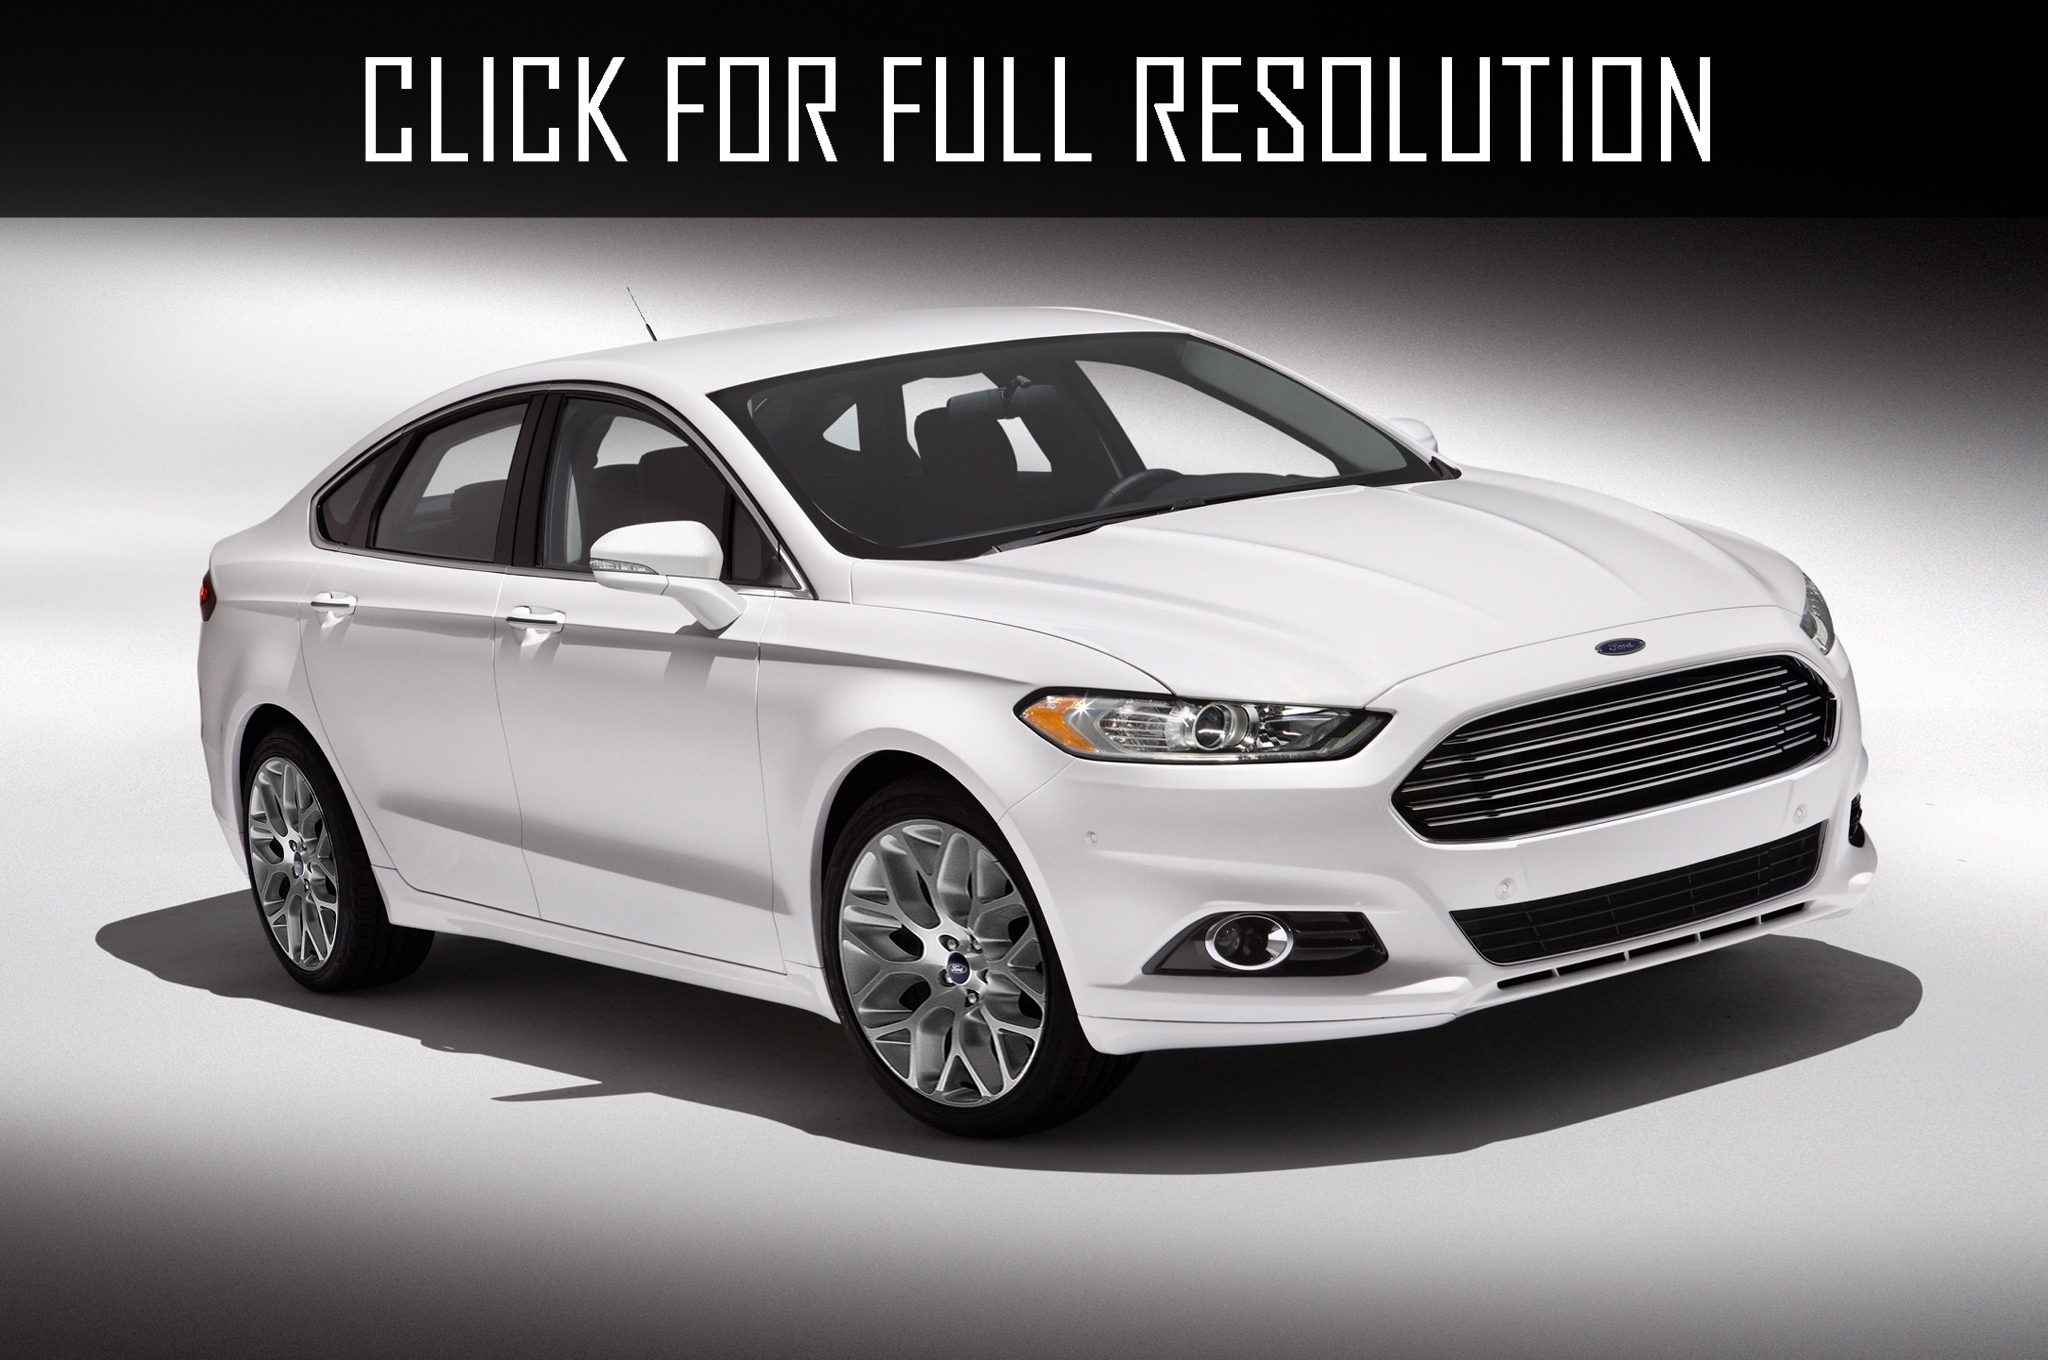 Ford Fusion Trend